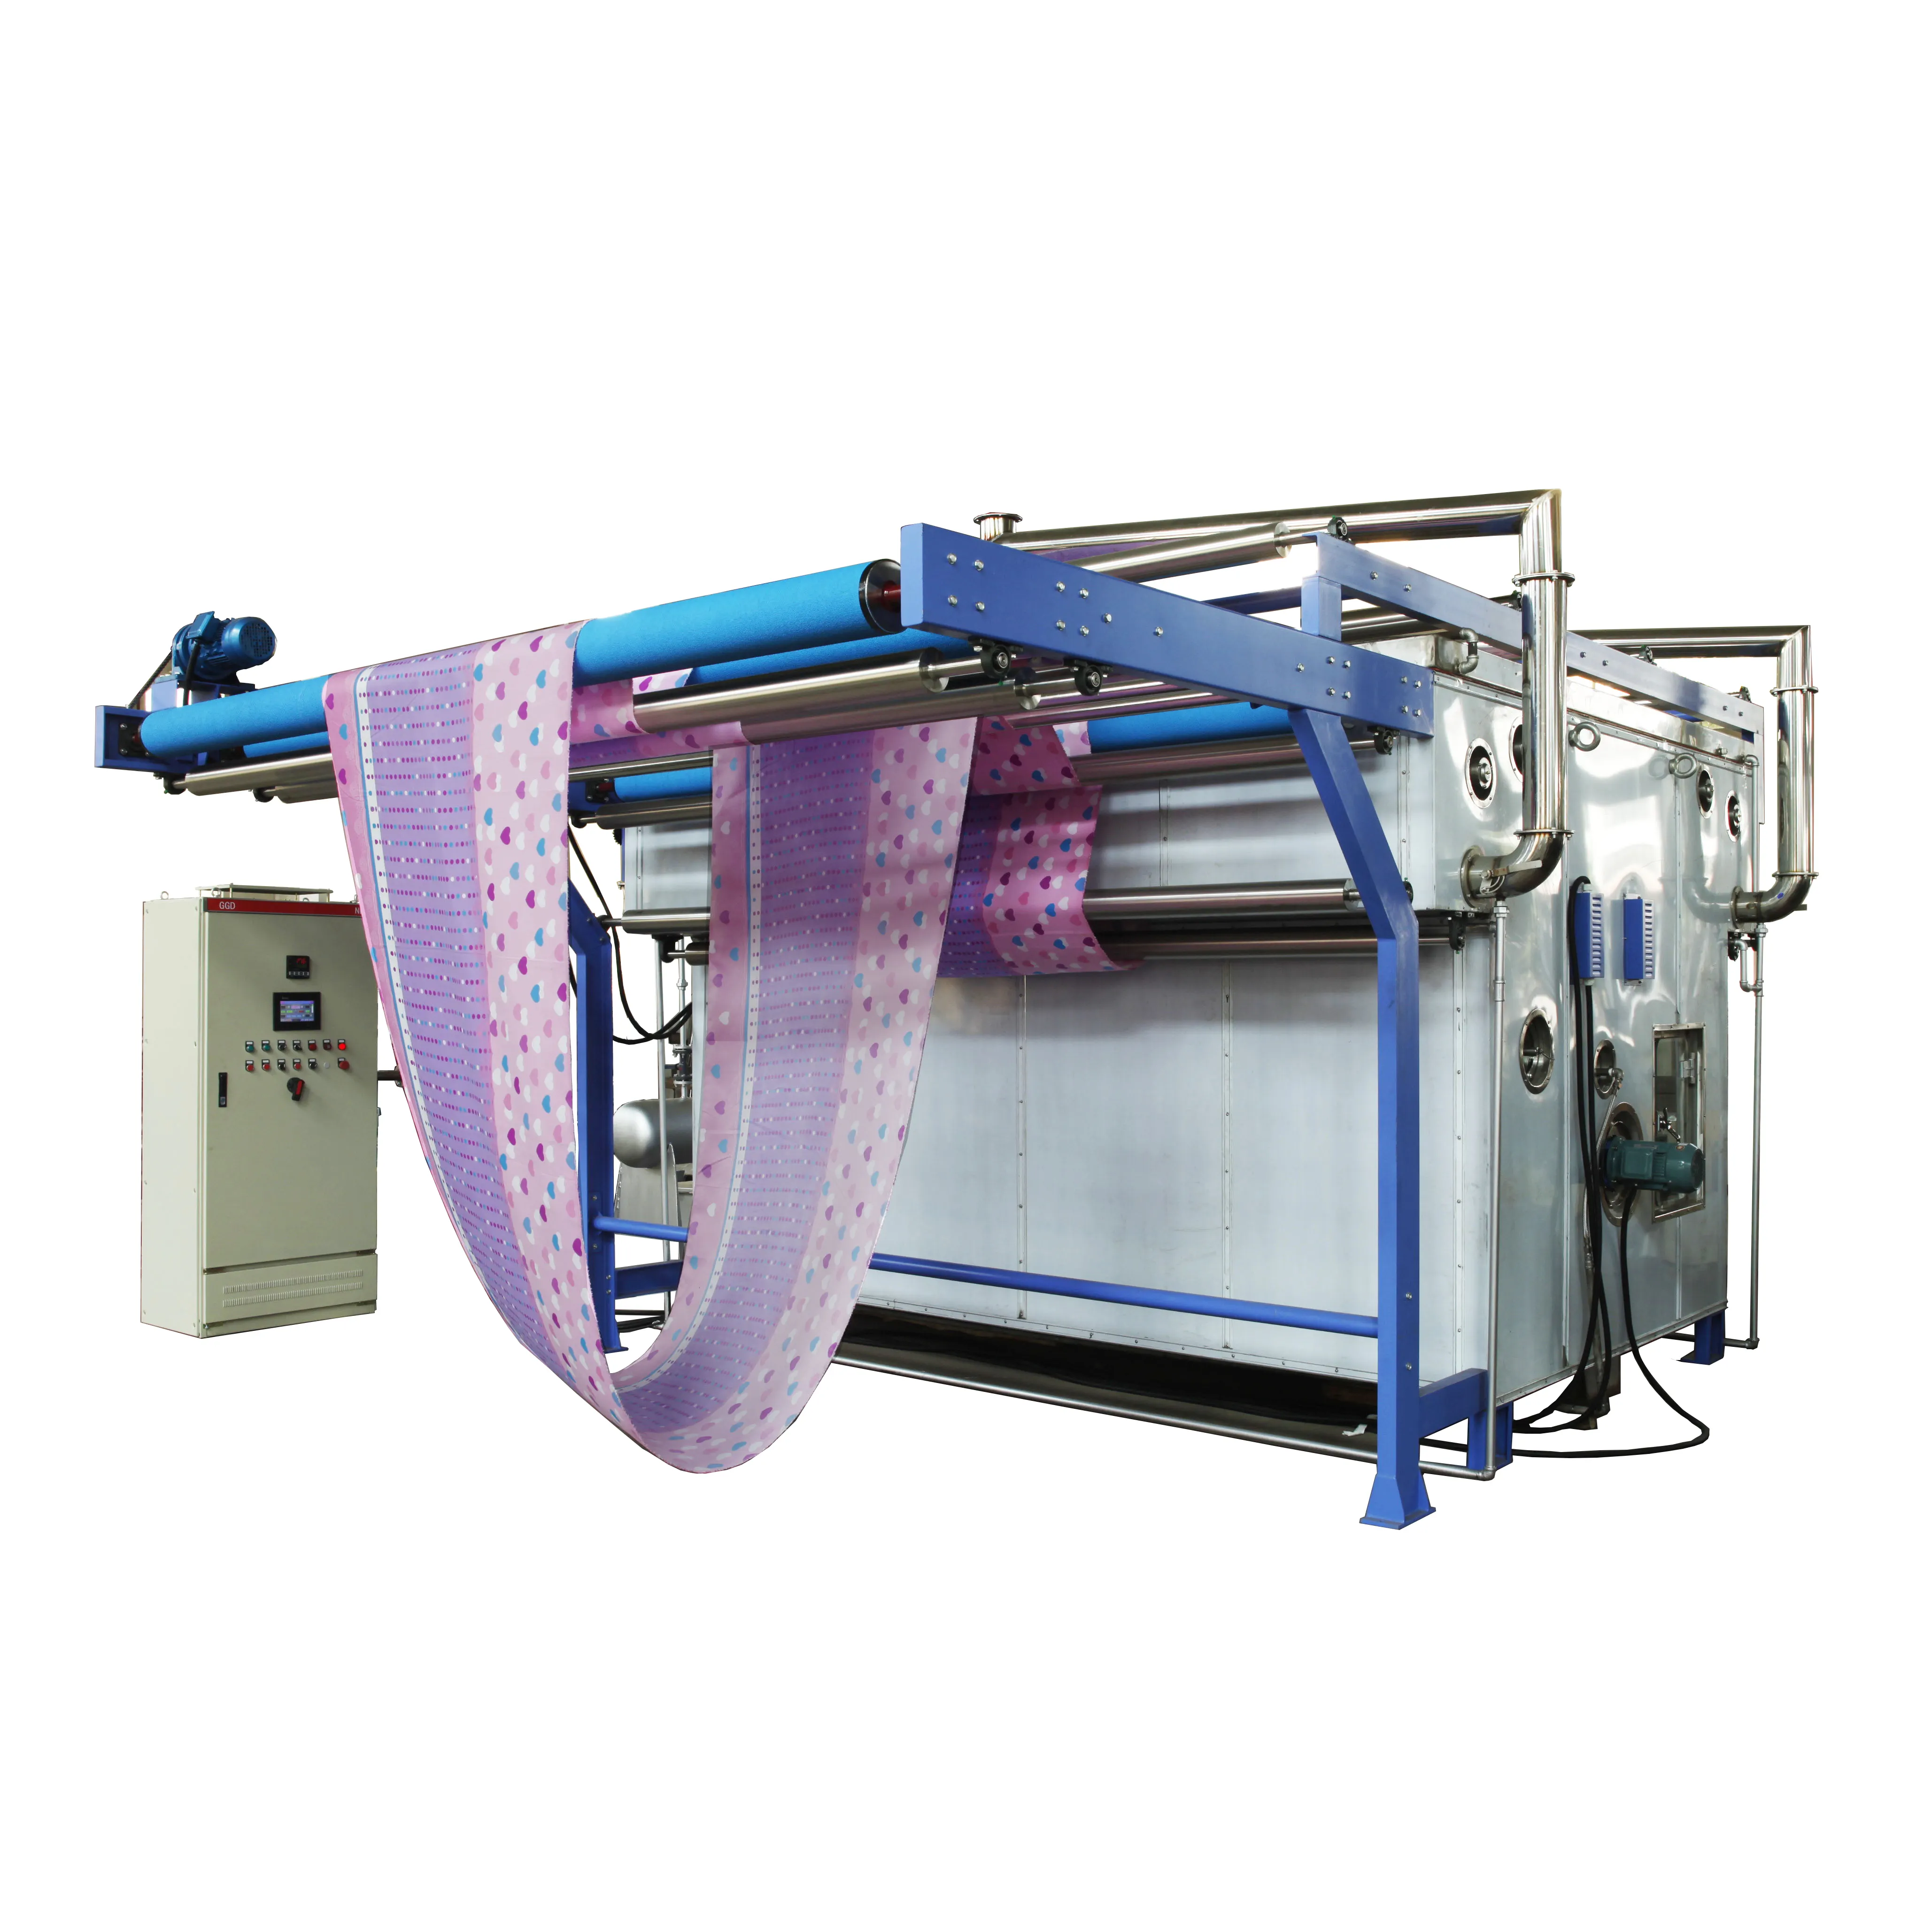 Continuous digital printing textile fabric steamer